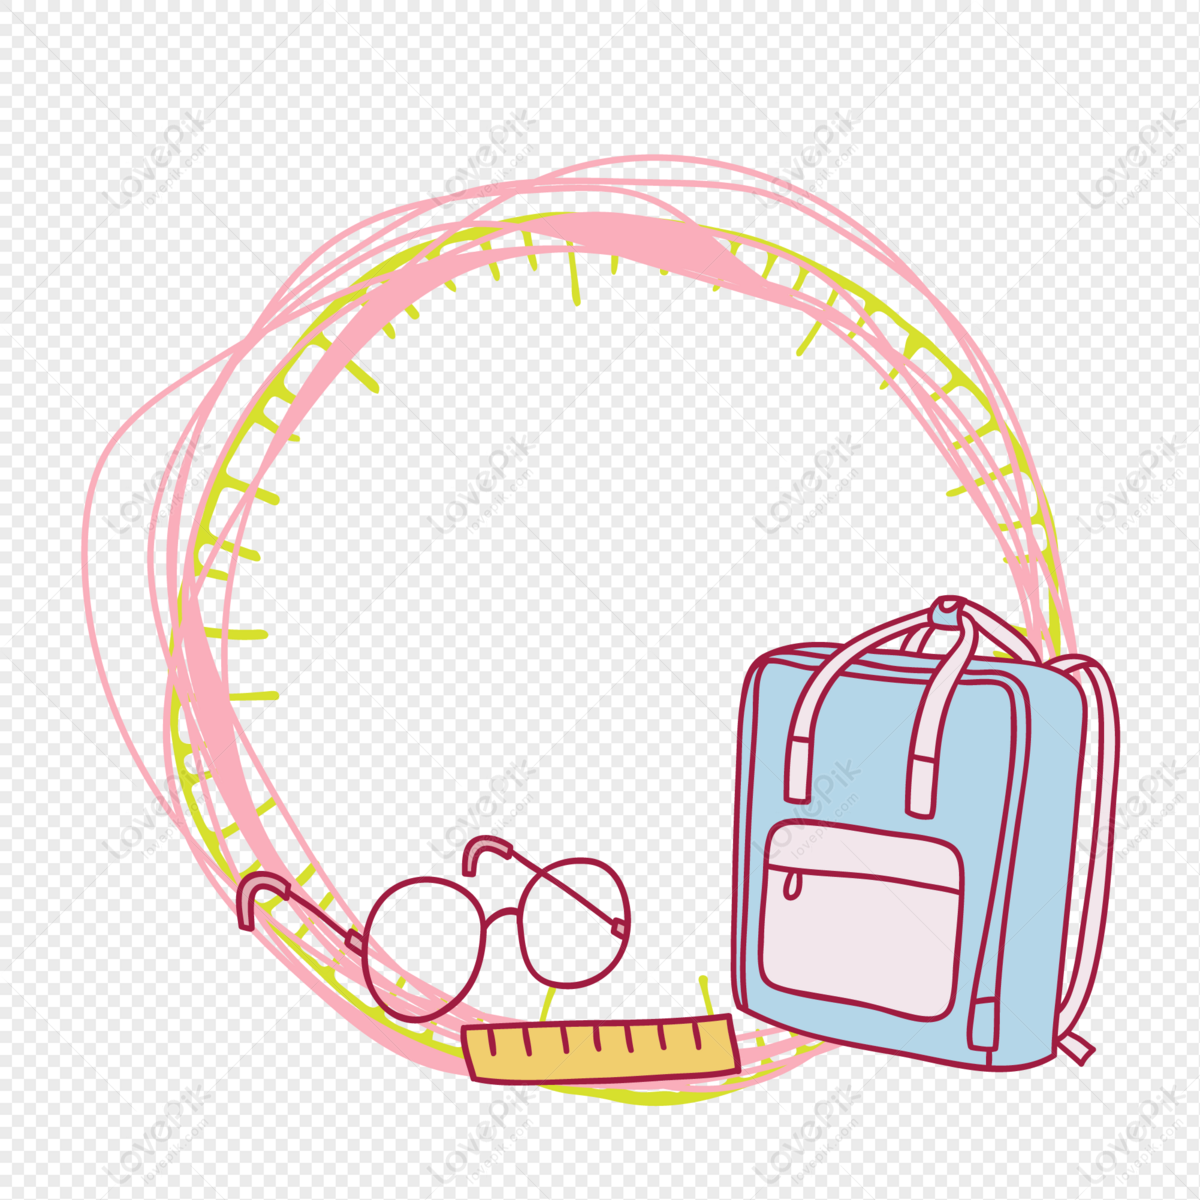 Cute School Learning Element Border For School Day PNG Image Free Download  And Clipart Image For Free Download - Lovepik | 401467601